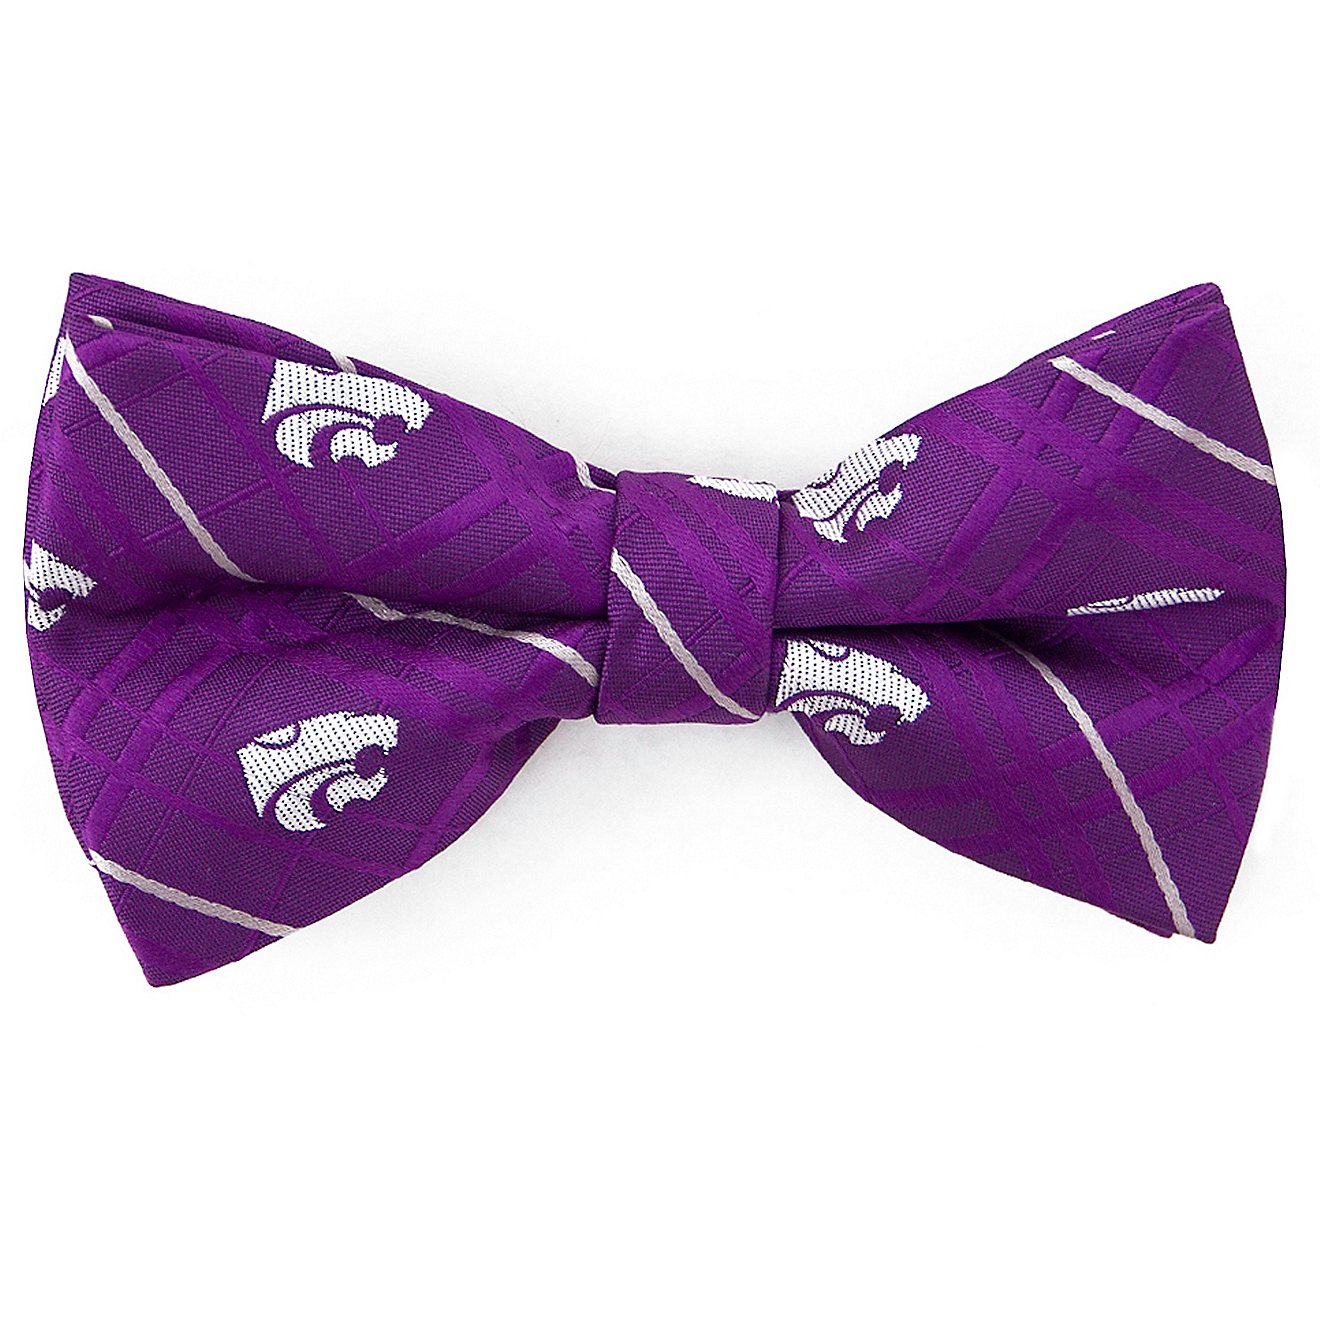 Eagles Wings Men's Kansas State University Oxford Bow Tie                                                                        - view number 1